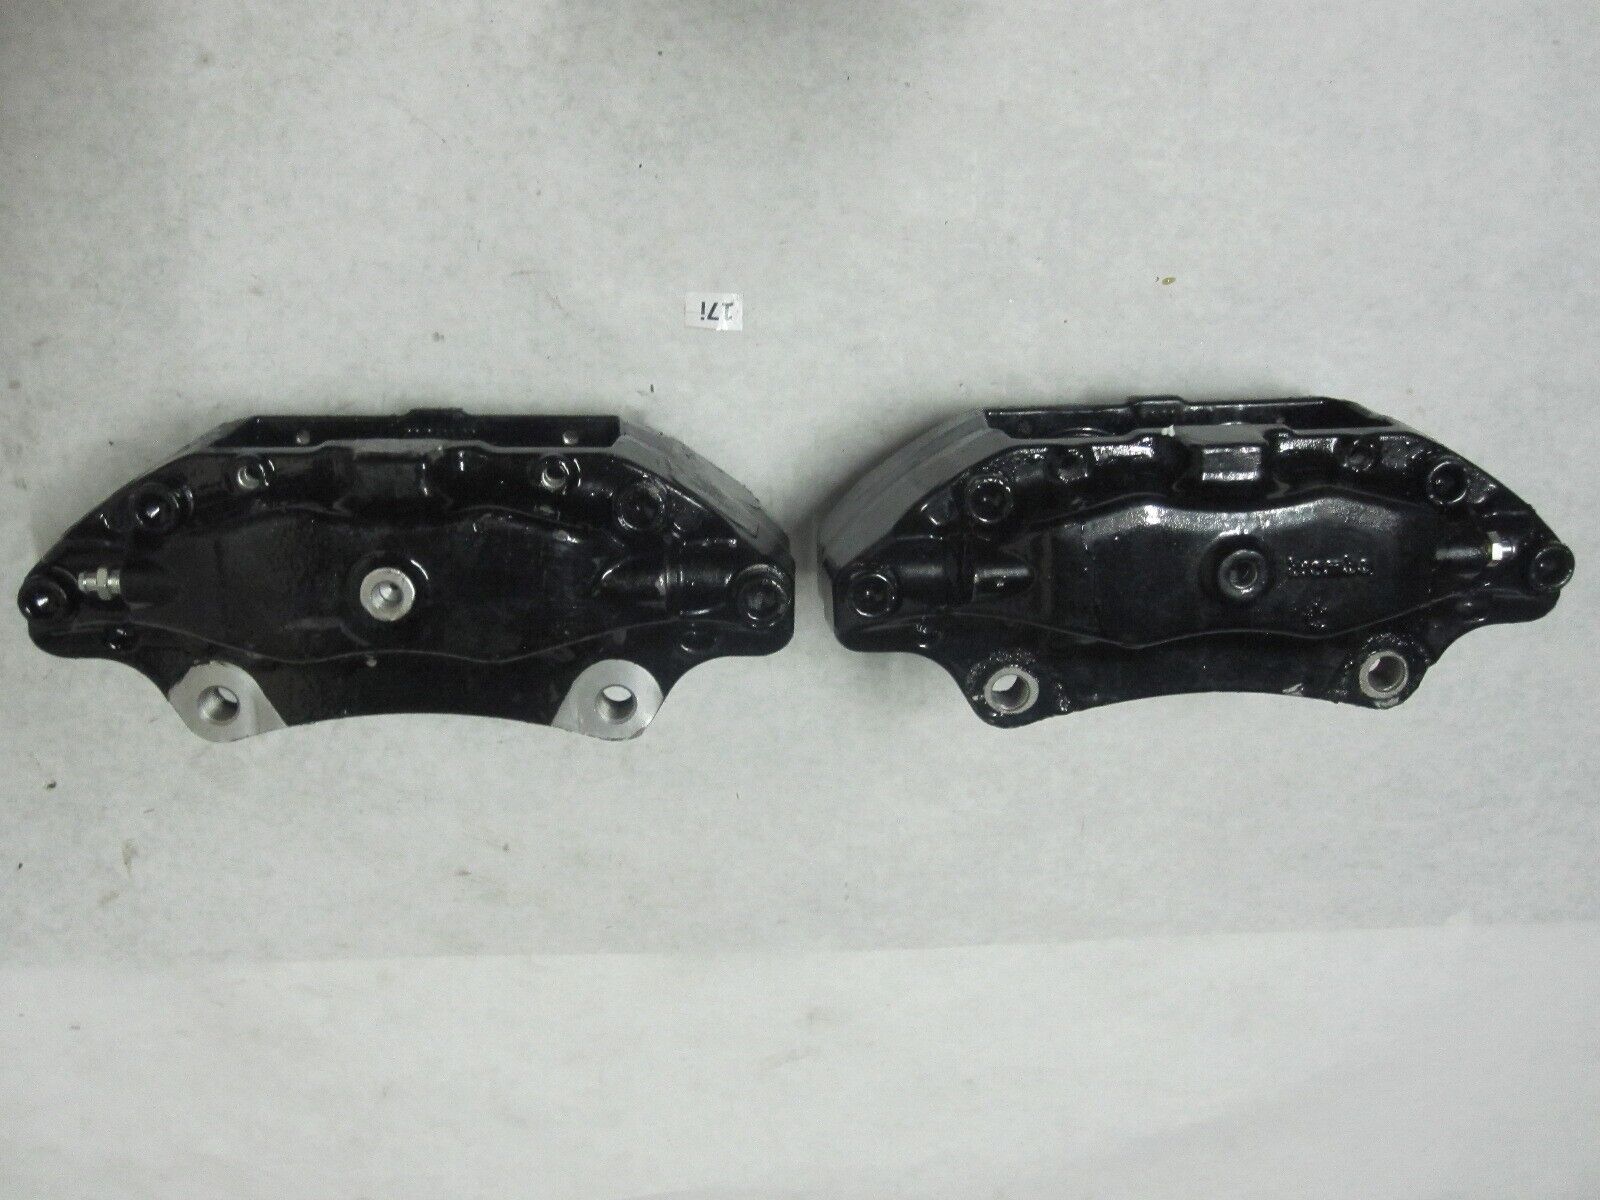 2004 2005 2006 2007 2008 ACURA TL TYPE-S Brembo Front Brake Calipers Set PAIR